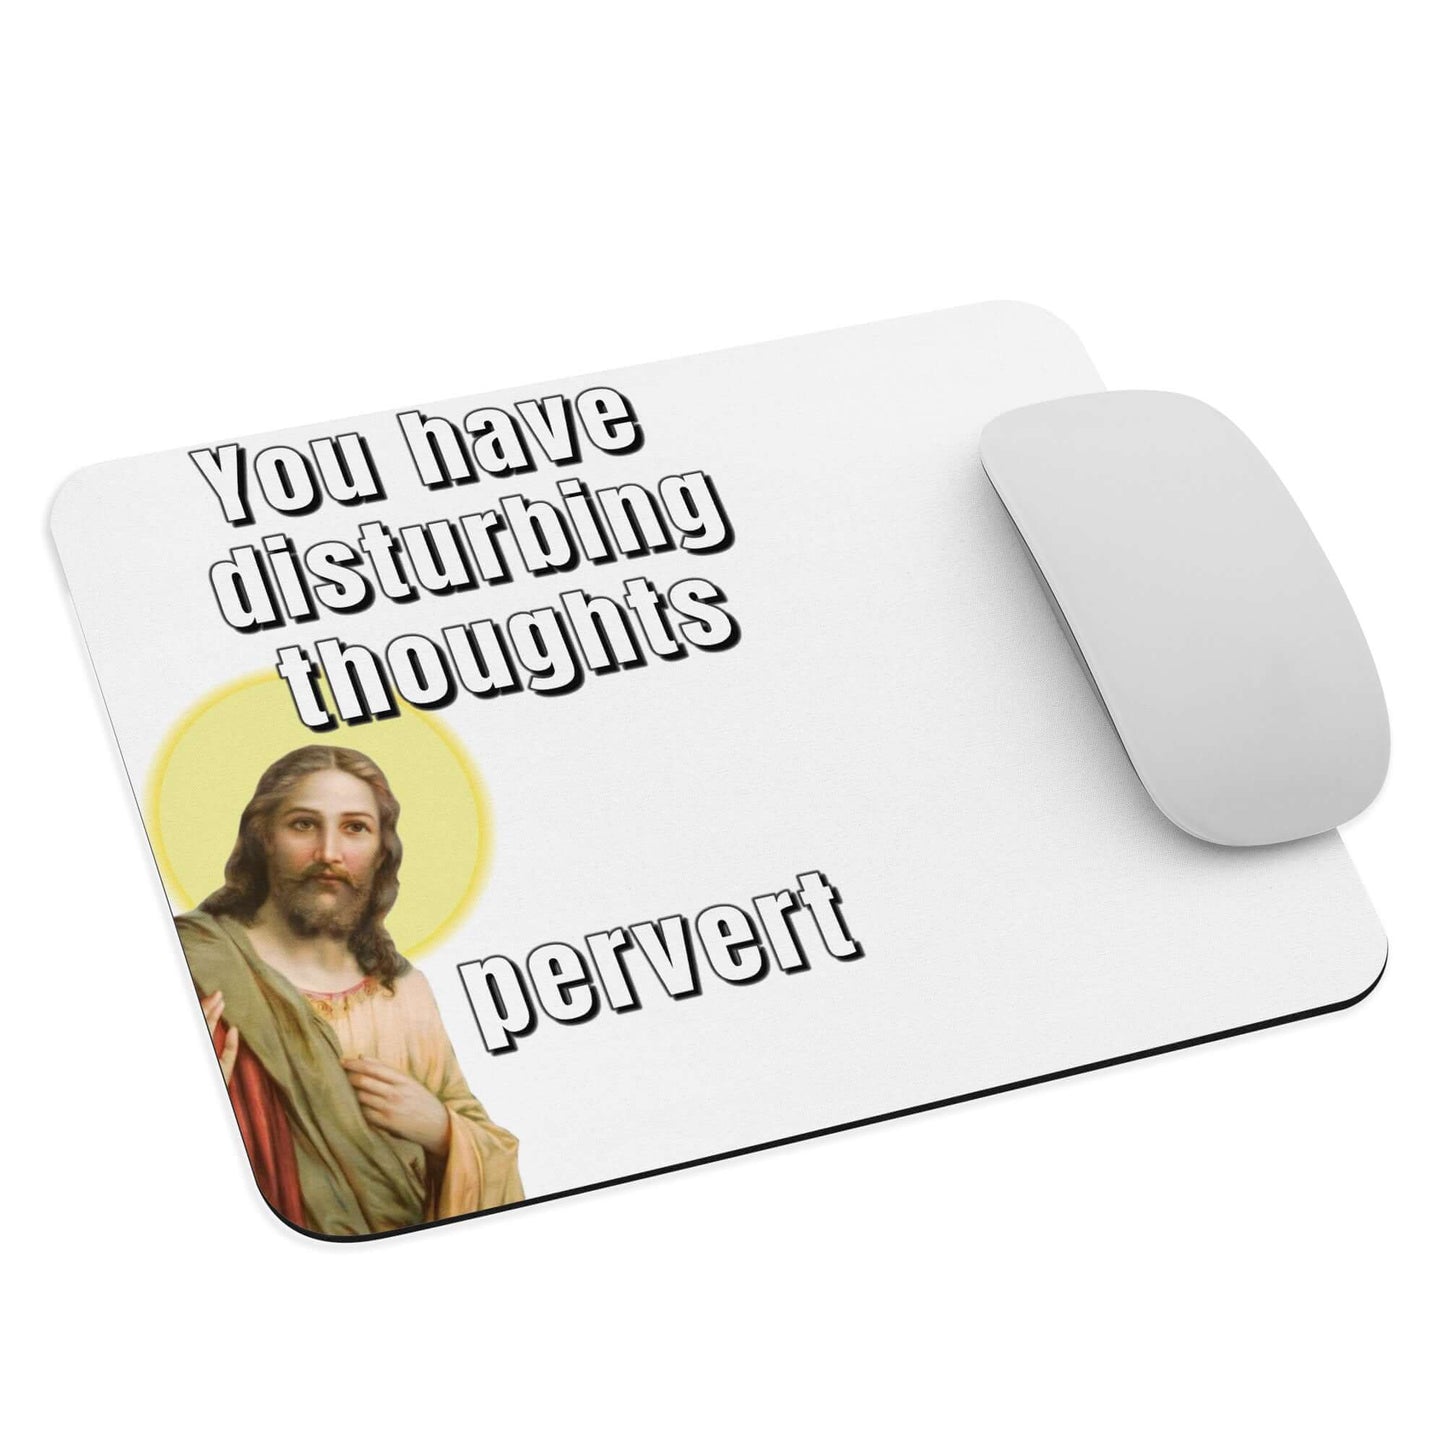 Jesus - You have disturbing thoughts... Pervert - Mouse pad - Horrible Designs